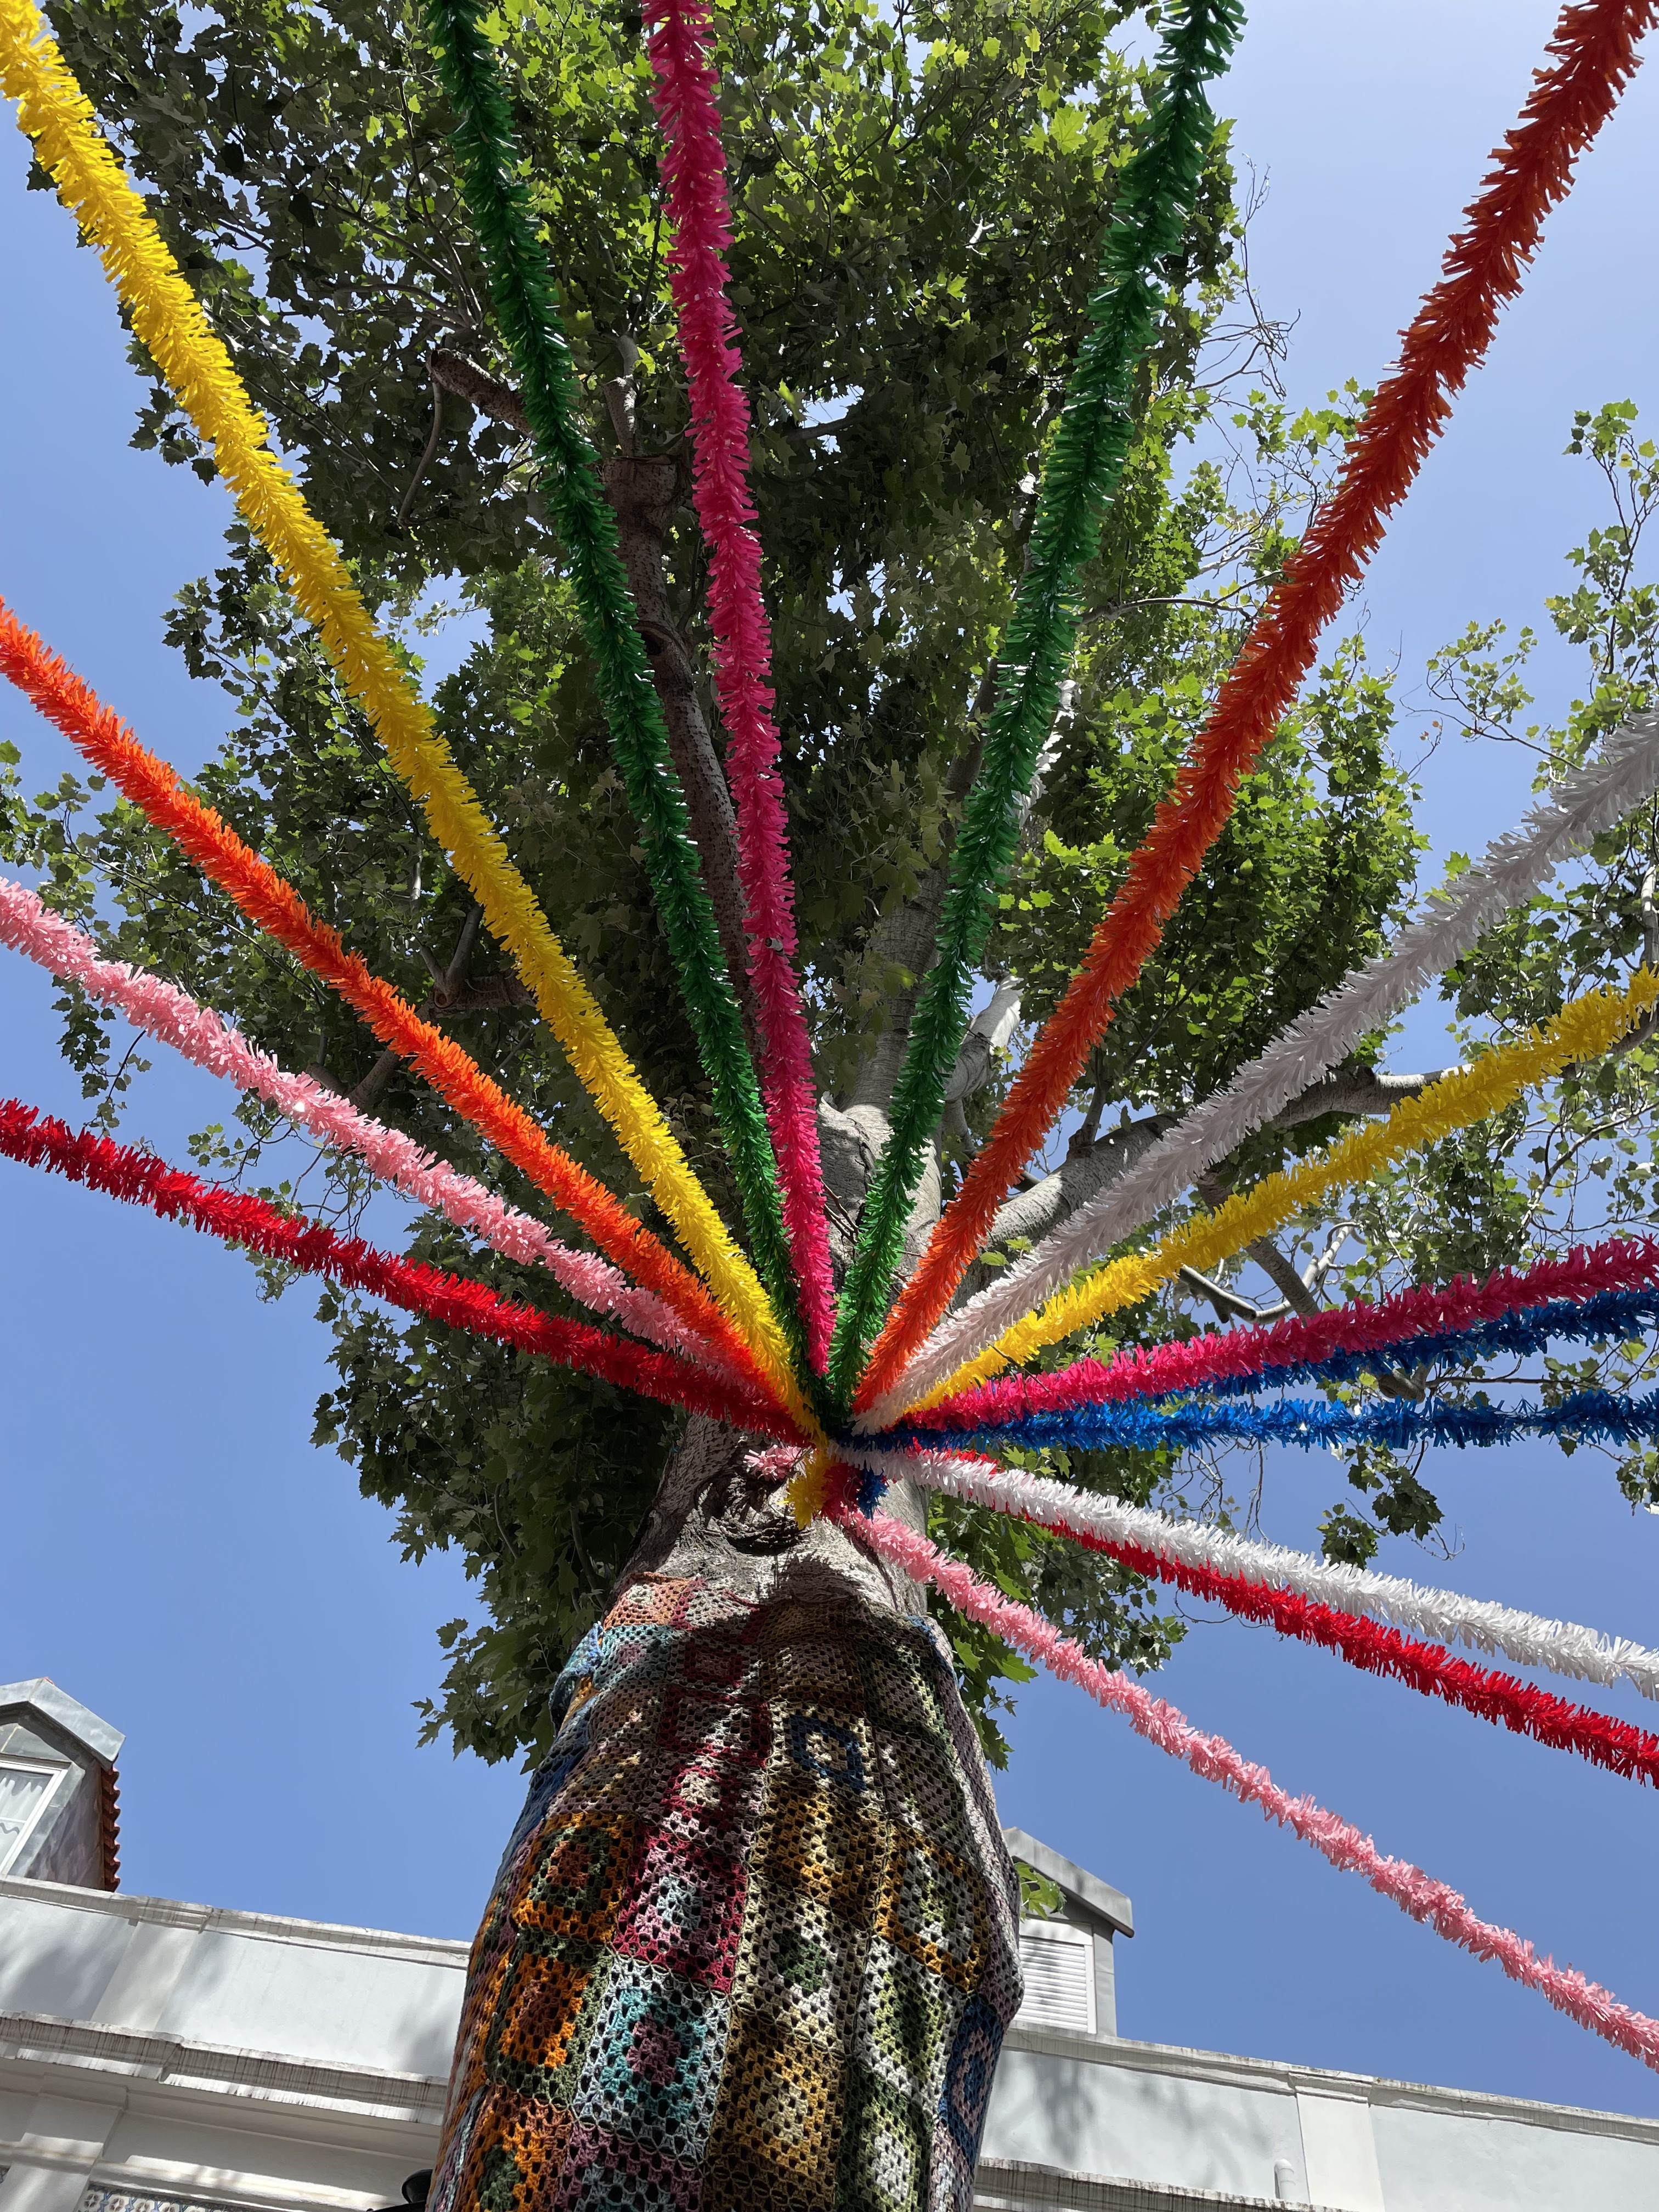 Colorful decorations attached to a tree in the Alfama district.